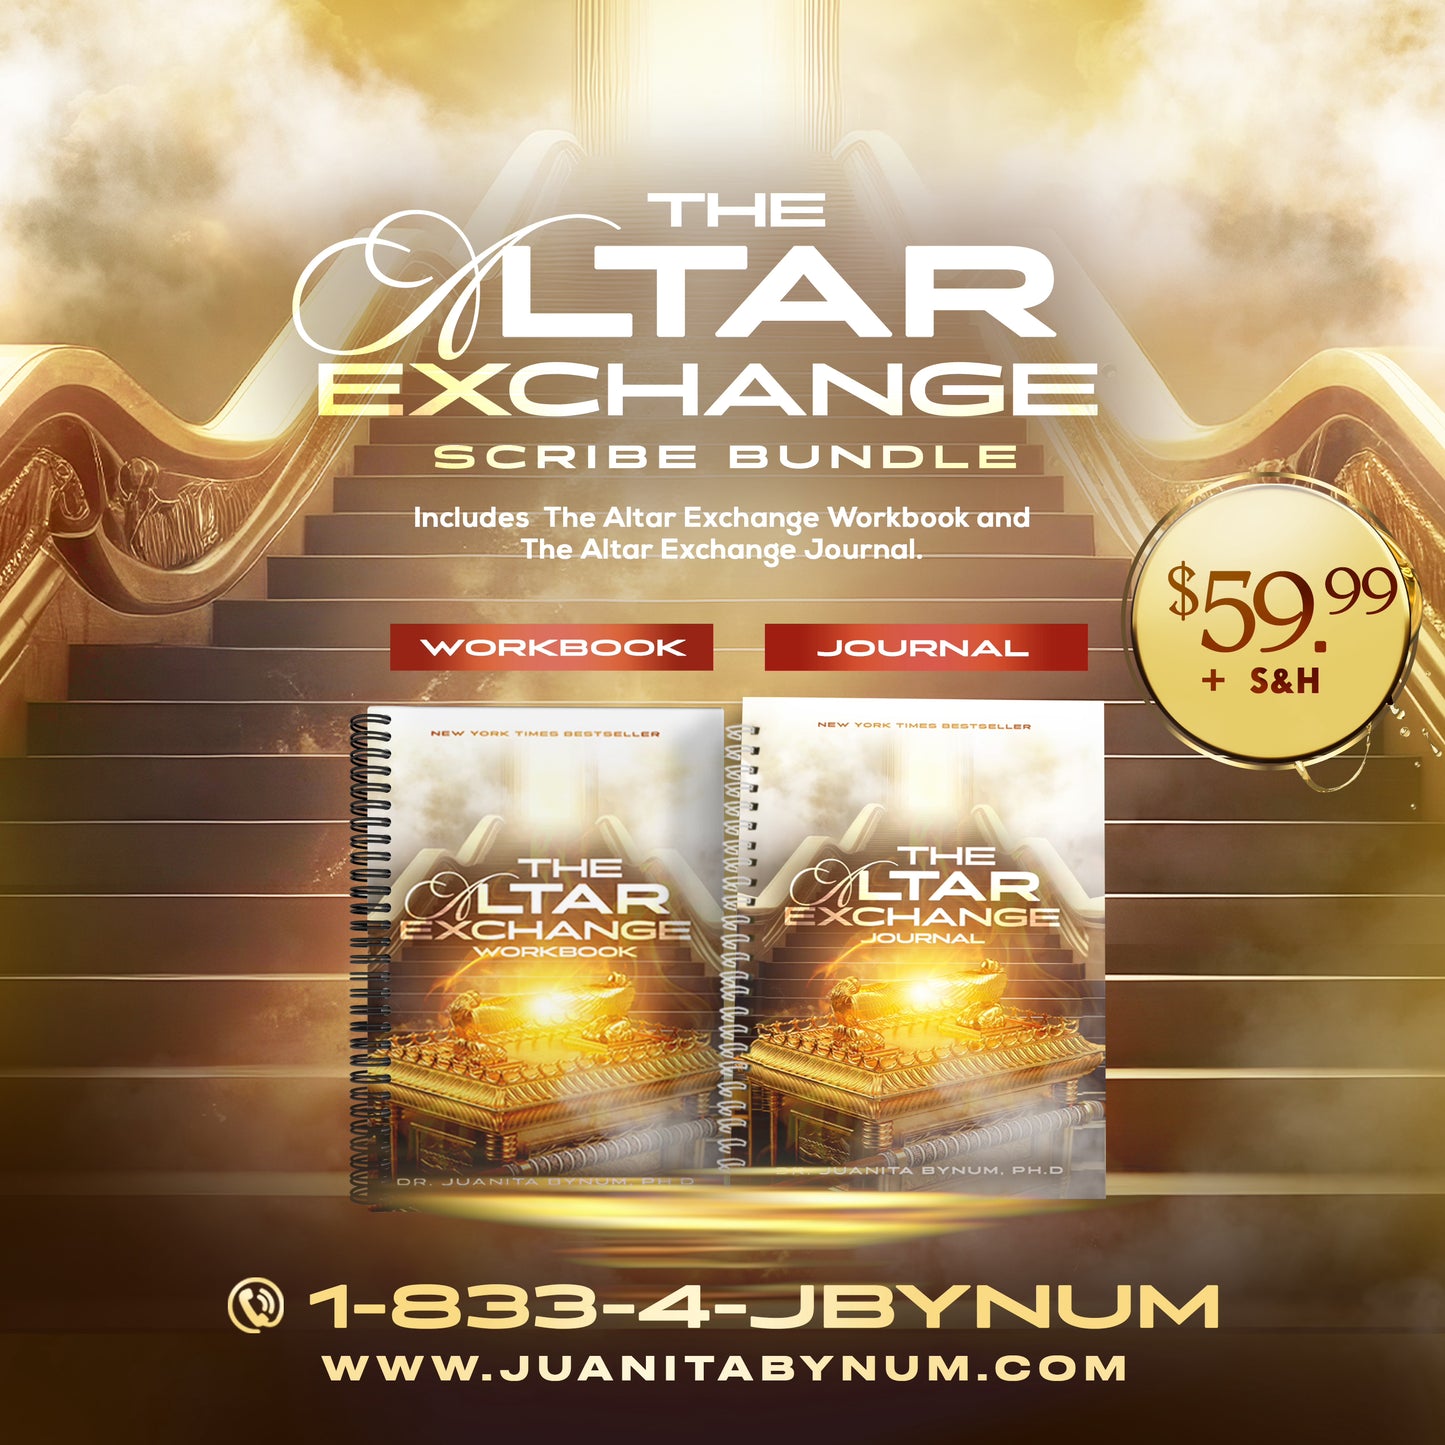 The Altar Exchange Scribe Collection